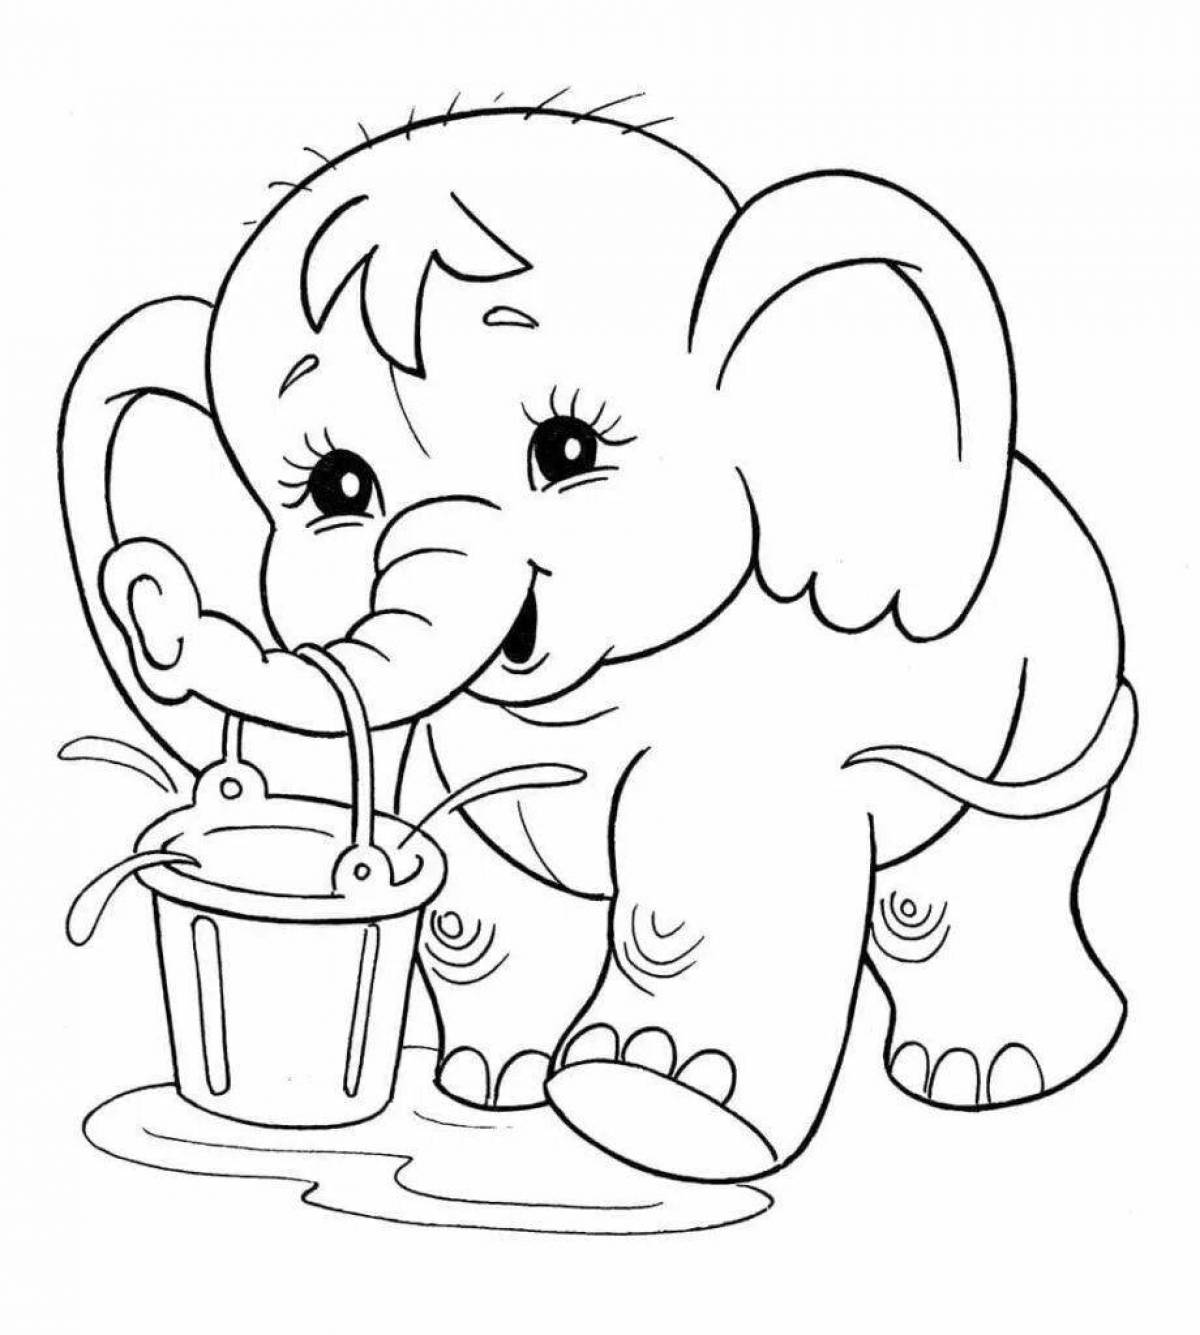 Coloring books for kids for kids #5